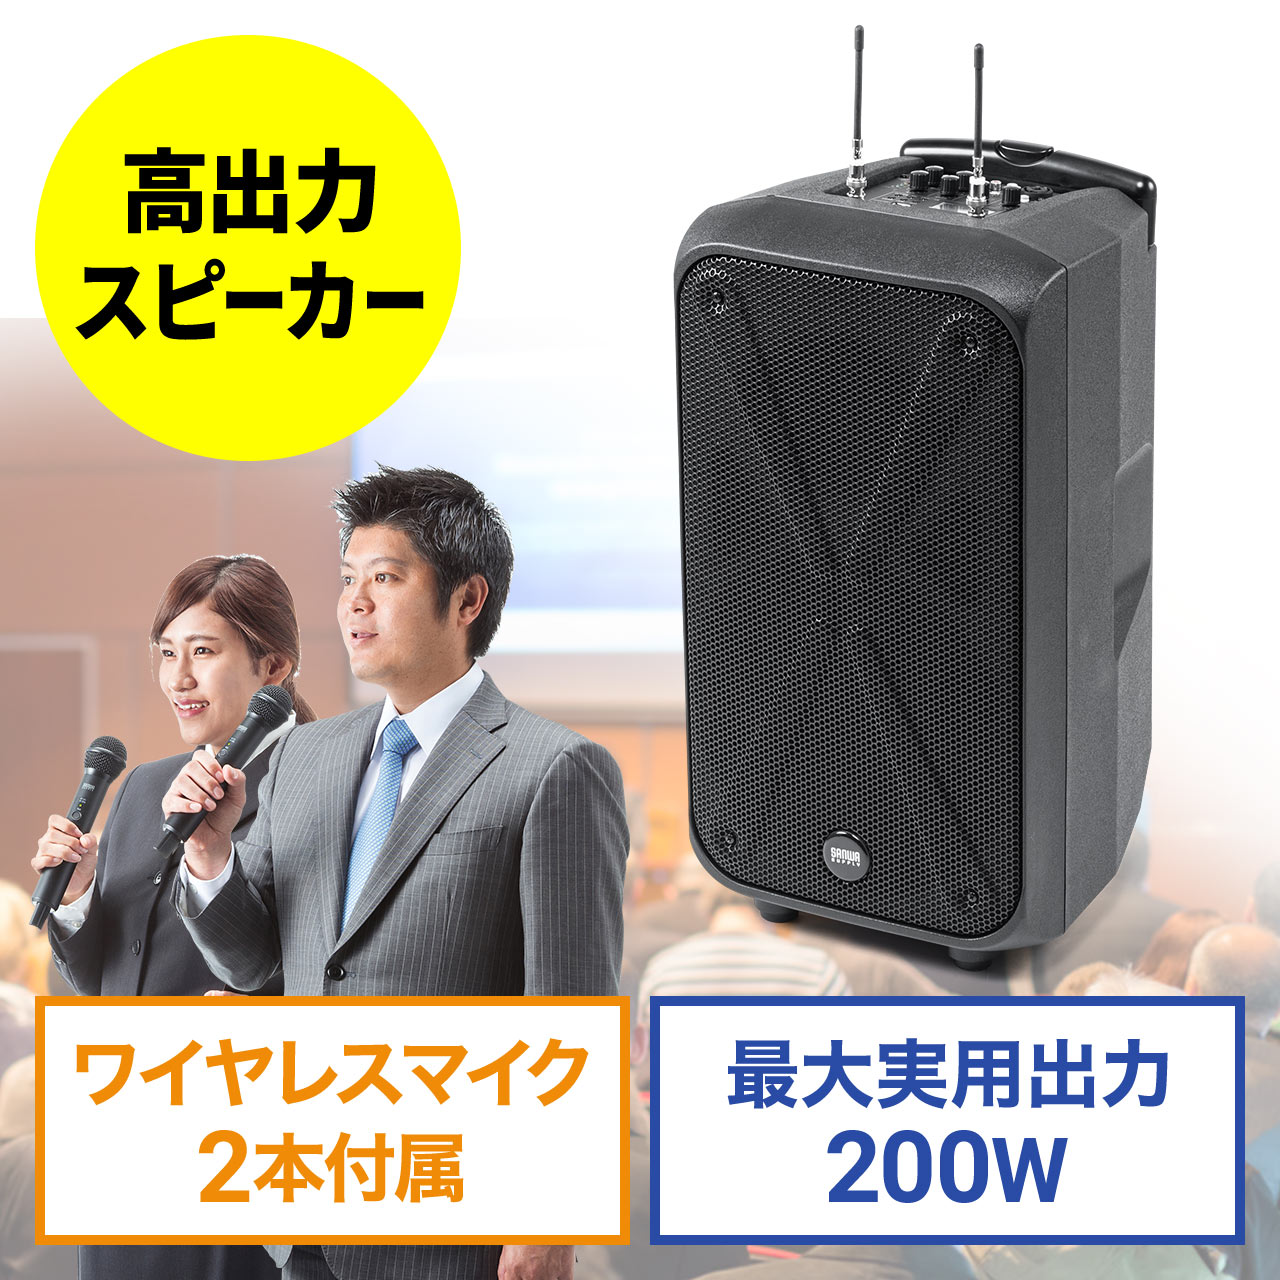 Office Home & Business 2019   2枚セットPC周辺機器